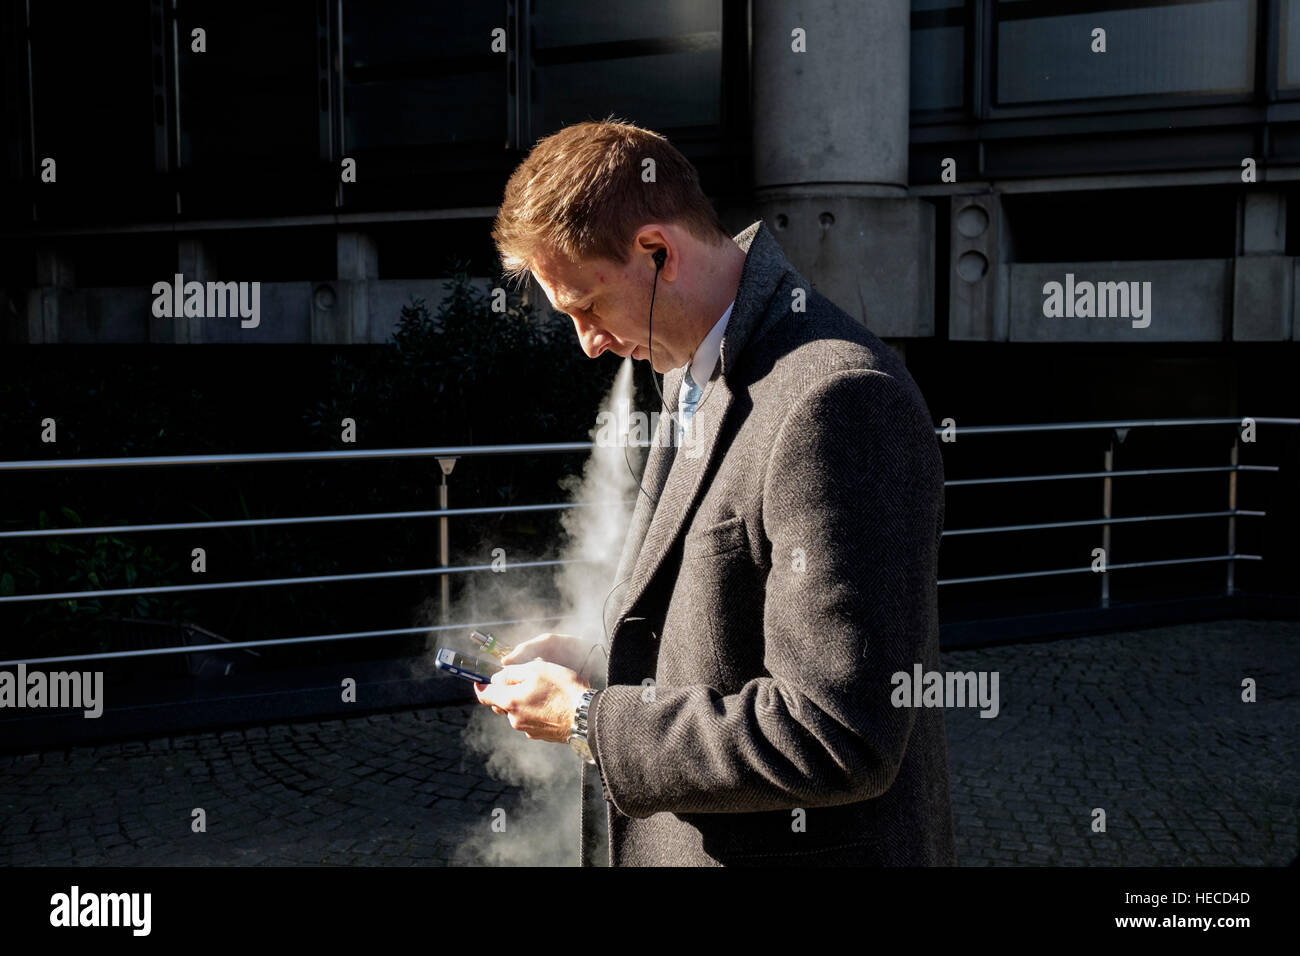 Businessman in the city of London engrossed in his mobile phone enjoys an E-Cigarette Stock Photo